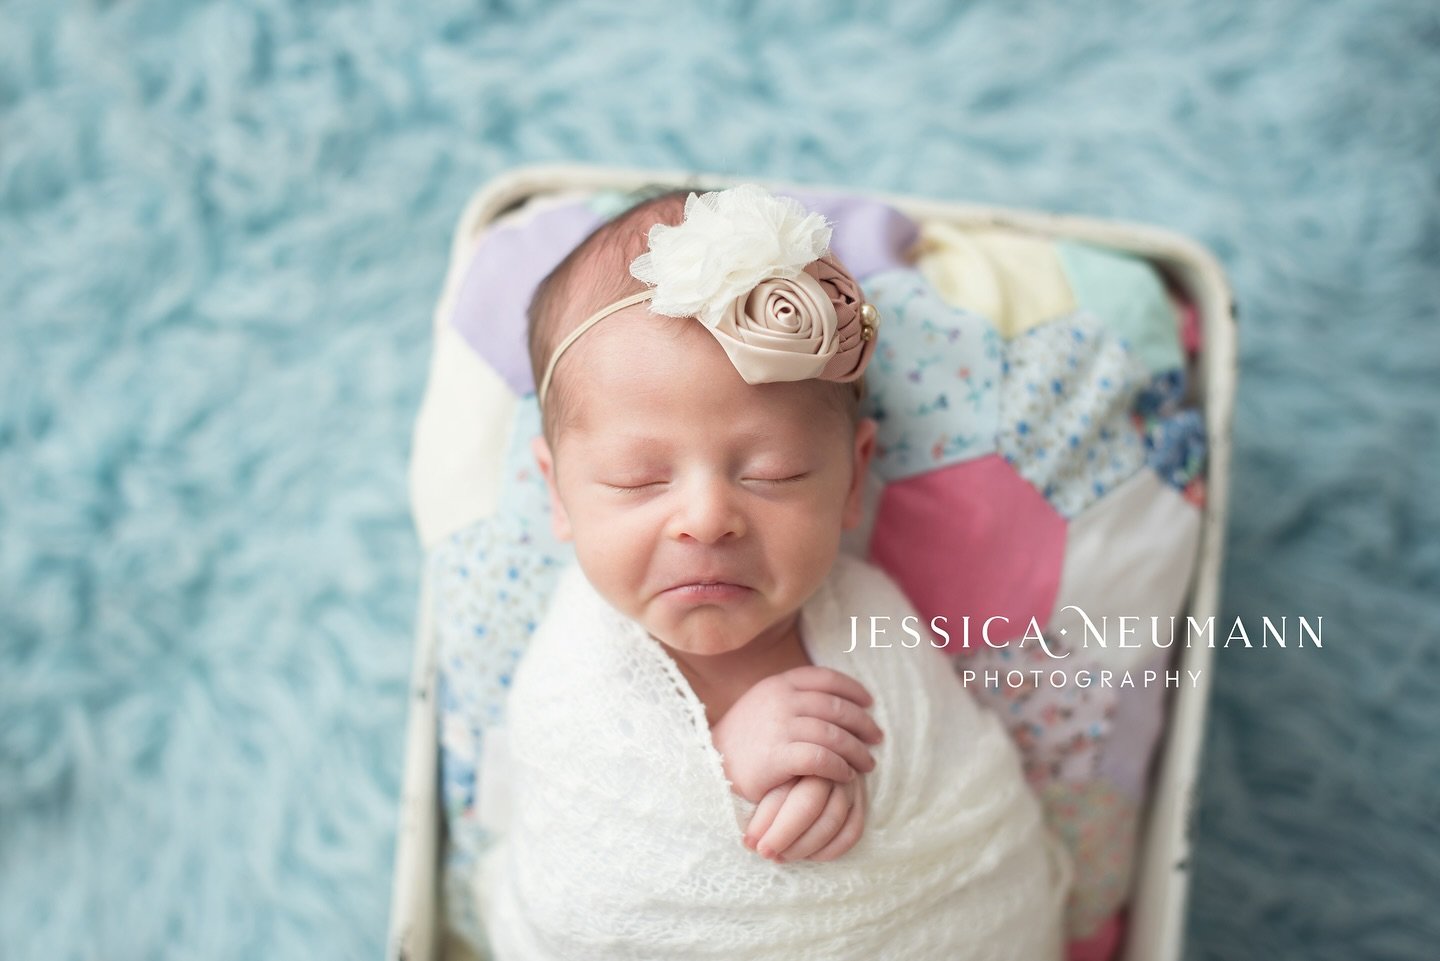 We&rsquo;re only half way through the week?! ☹️

If you&rsquo;re interested in booking a session, head to my website for more examples of my work, and booking info: https://www.jessicaneumannphotography.com/getting-started

#frederickmd #newmarketmd 